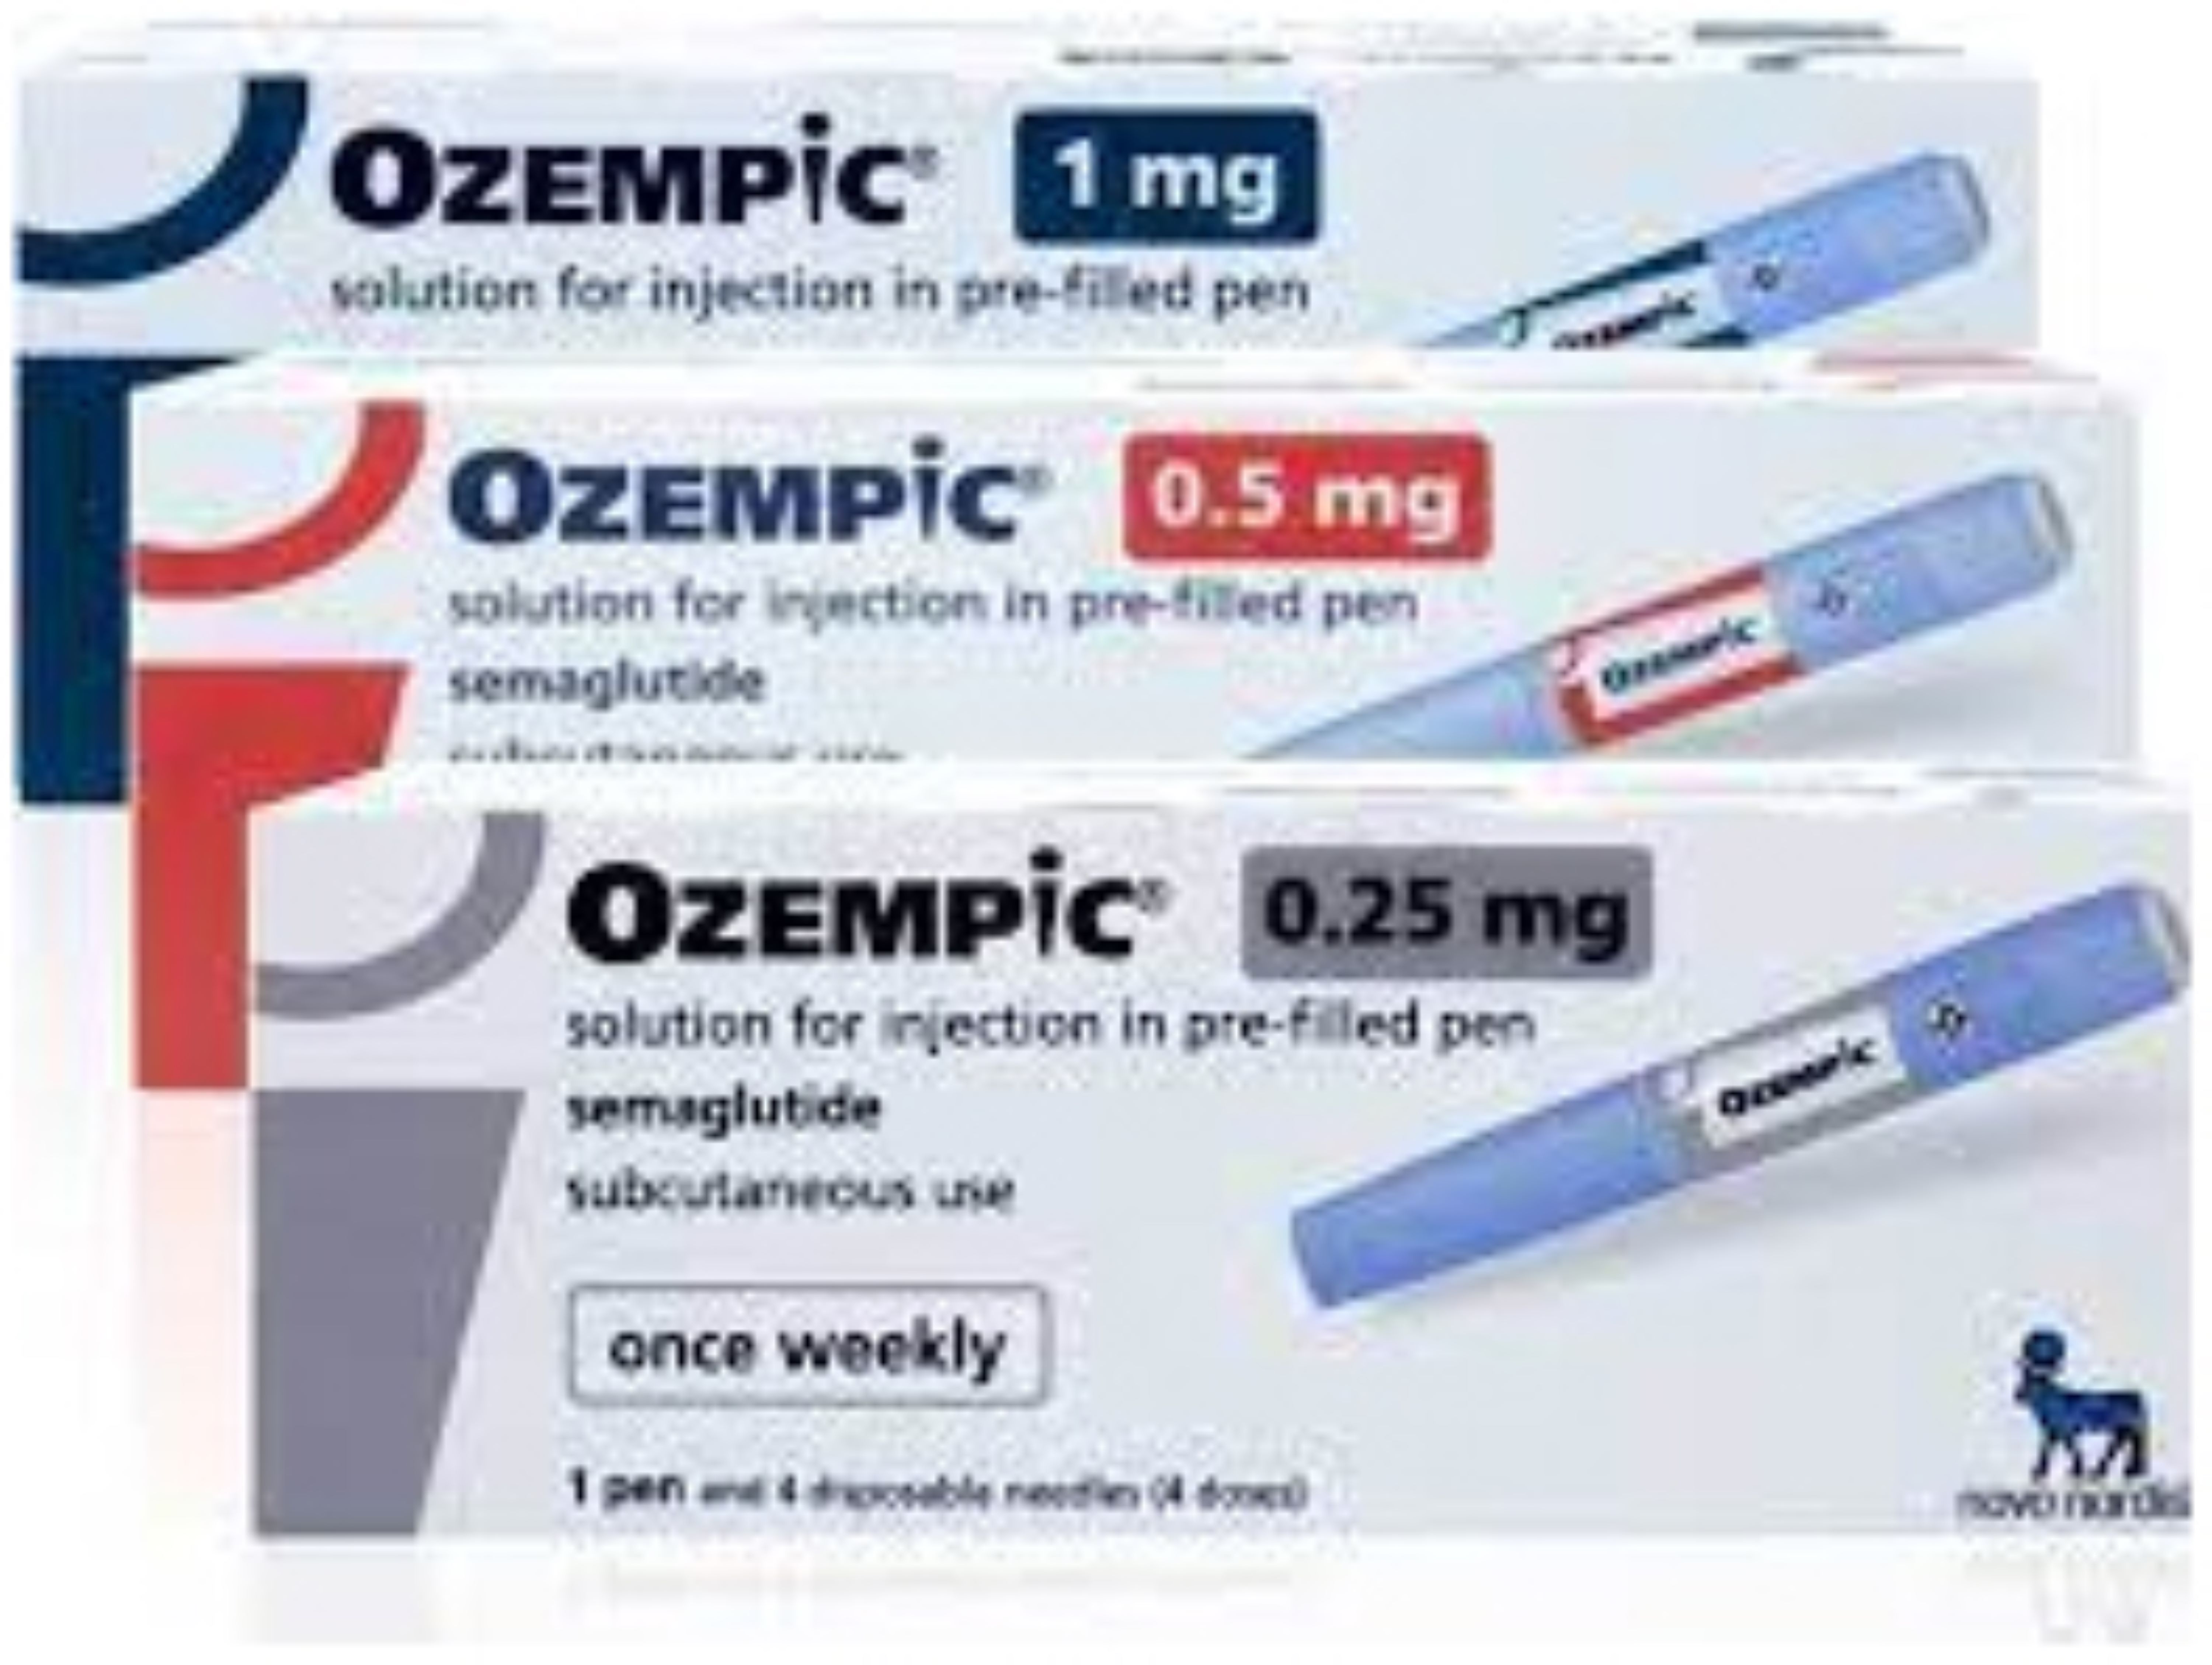 Everything You Need to Know About Ozempic